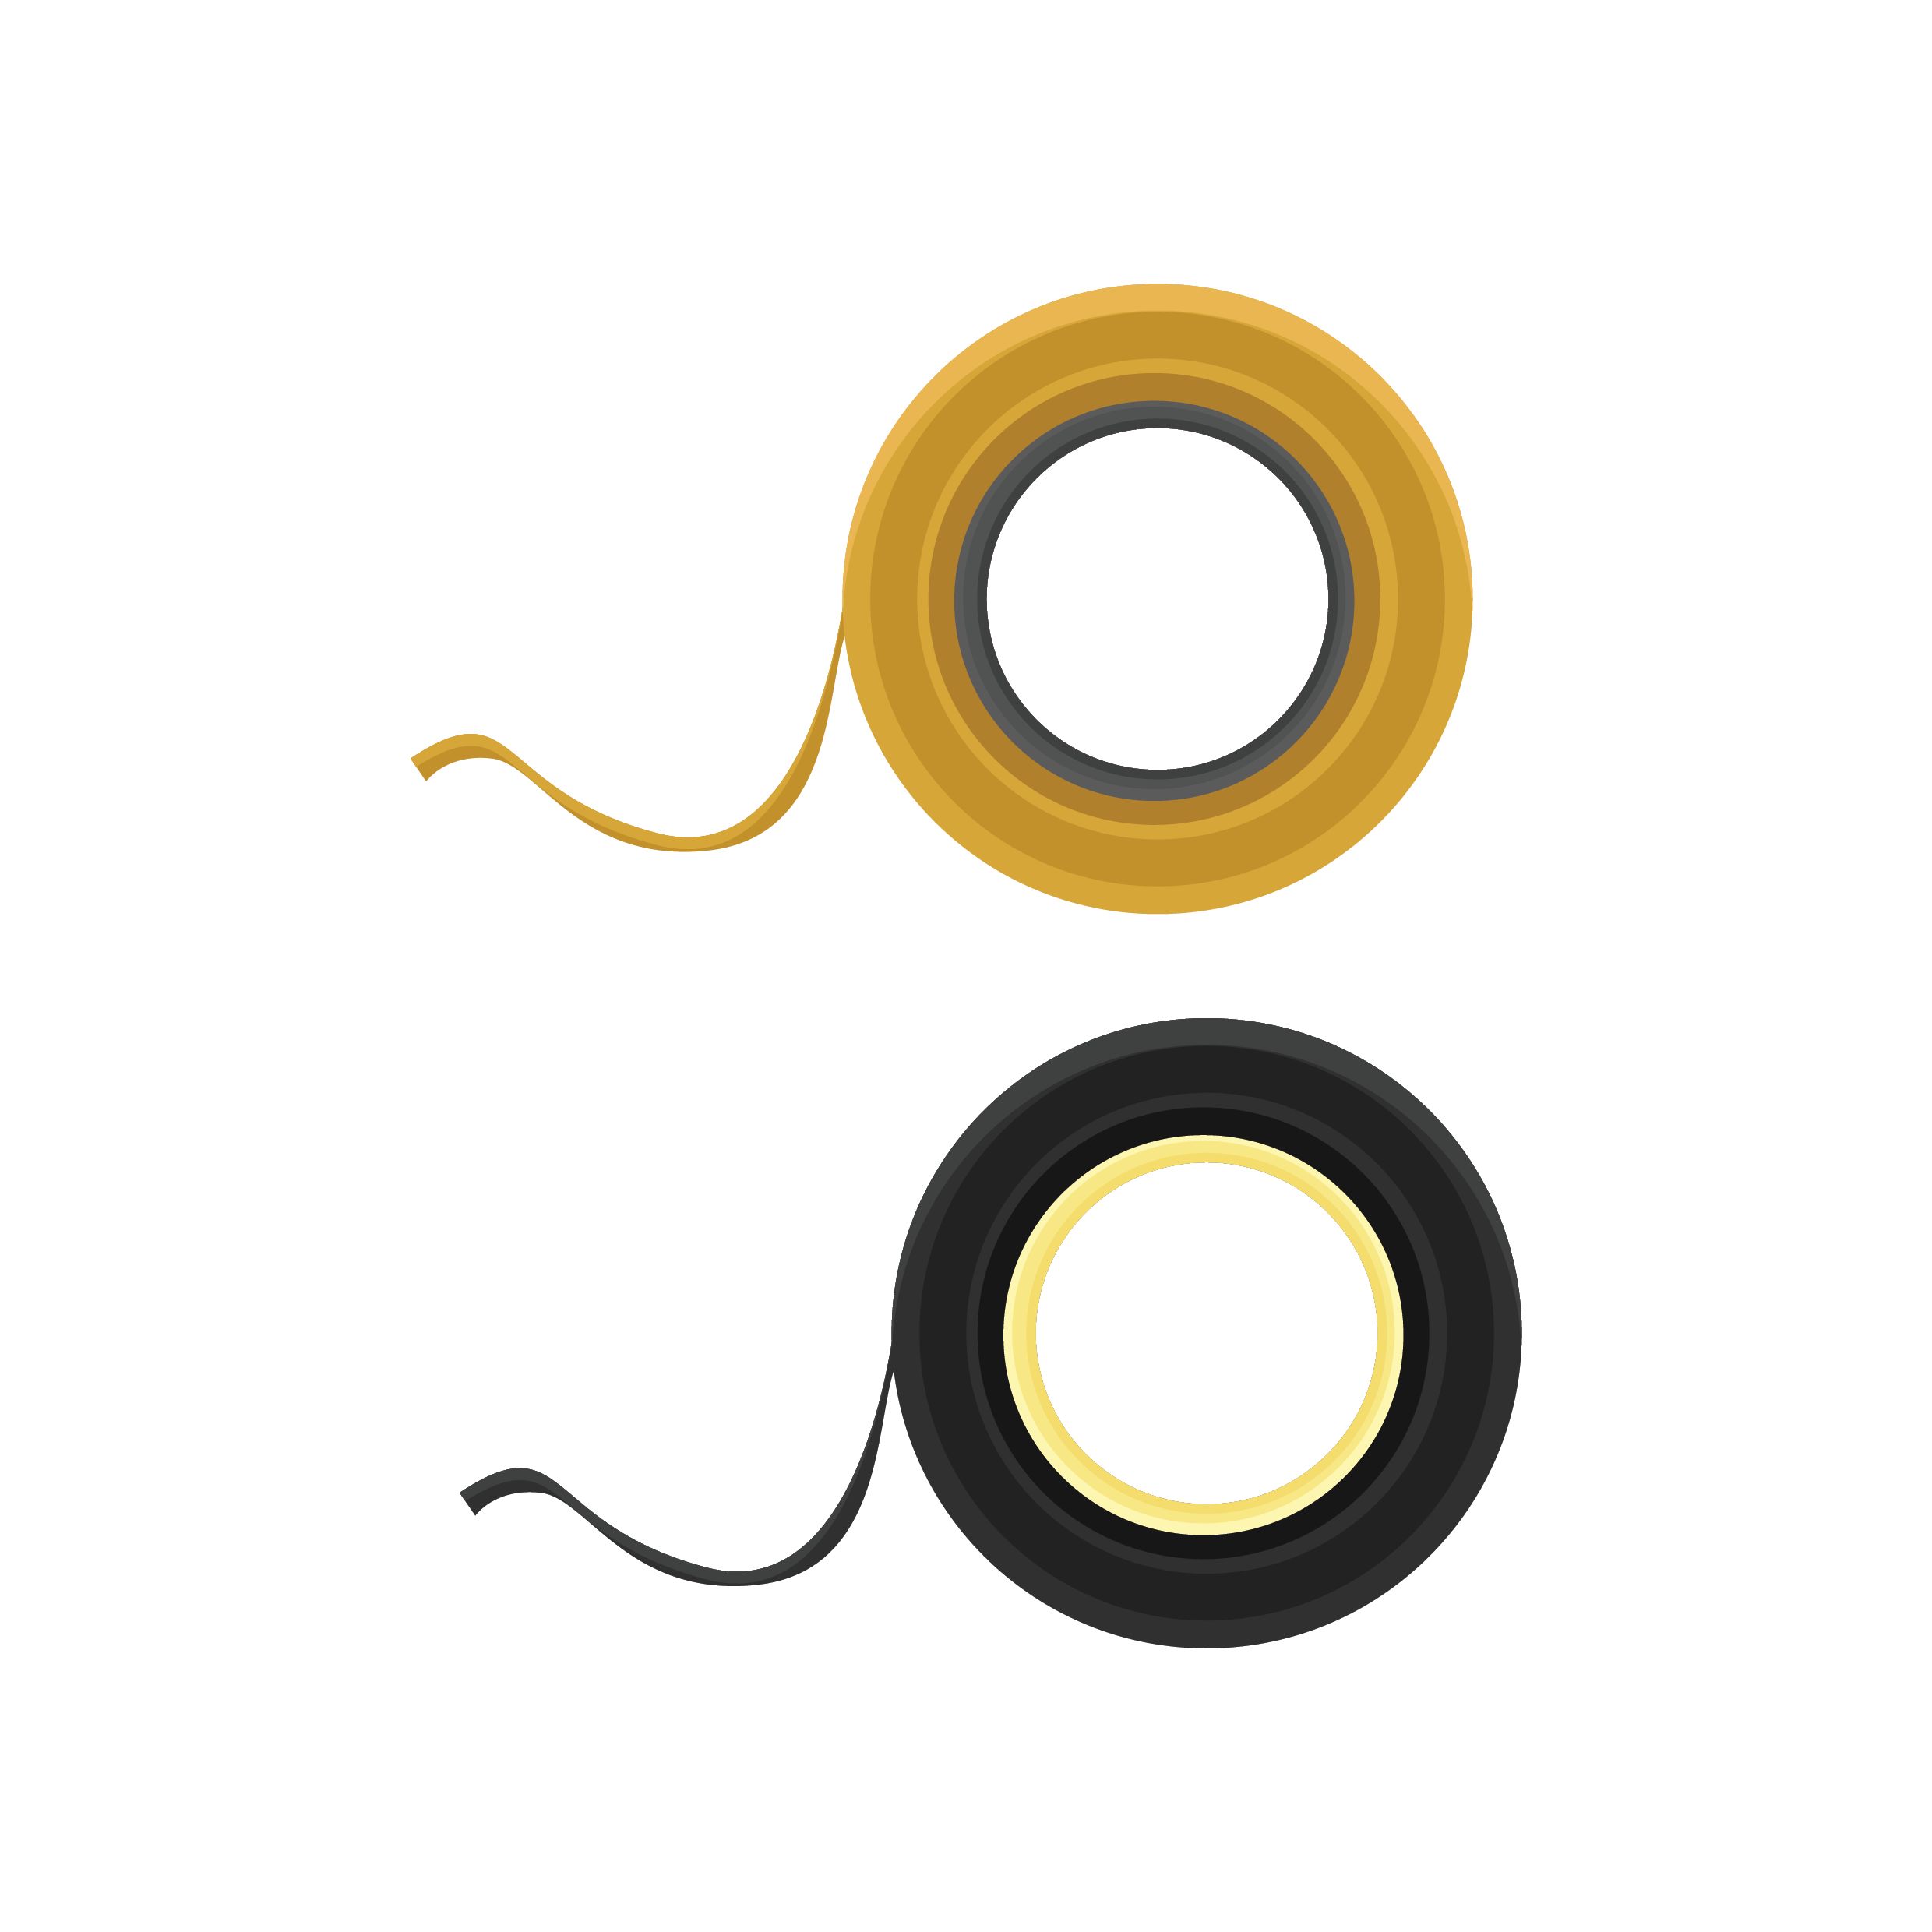 Yellow and Black duck tapes